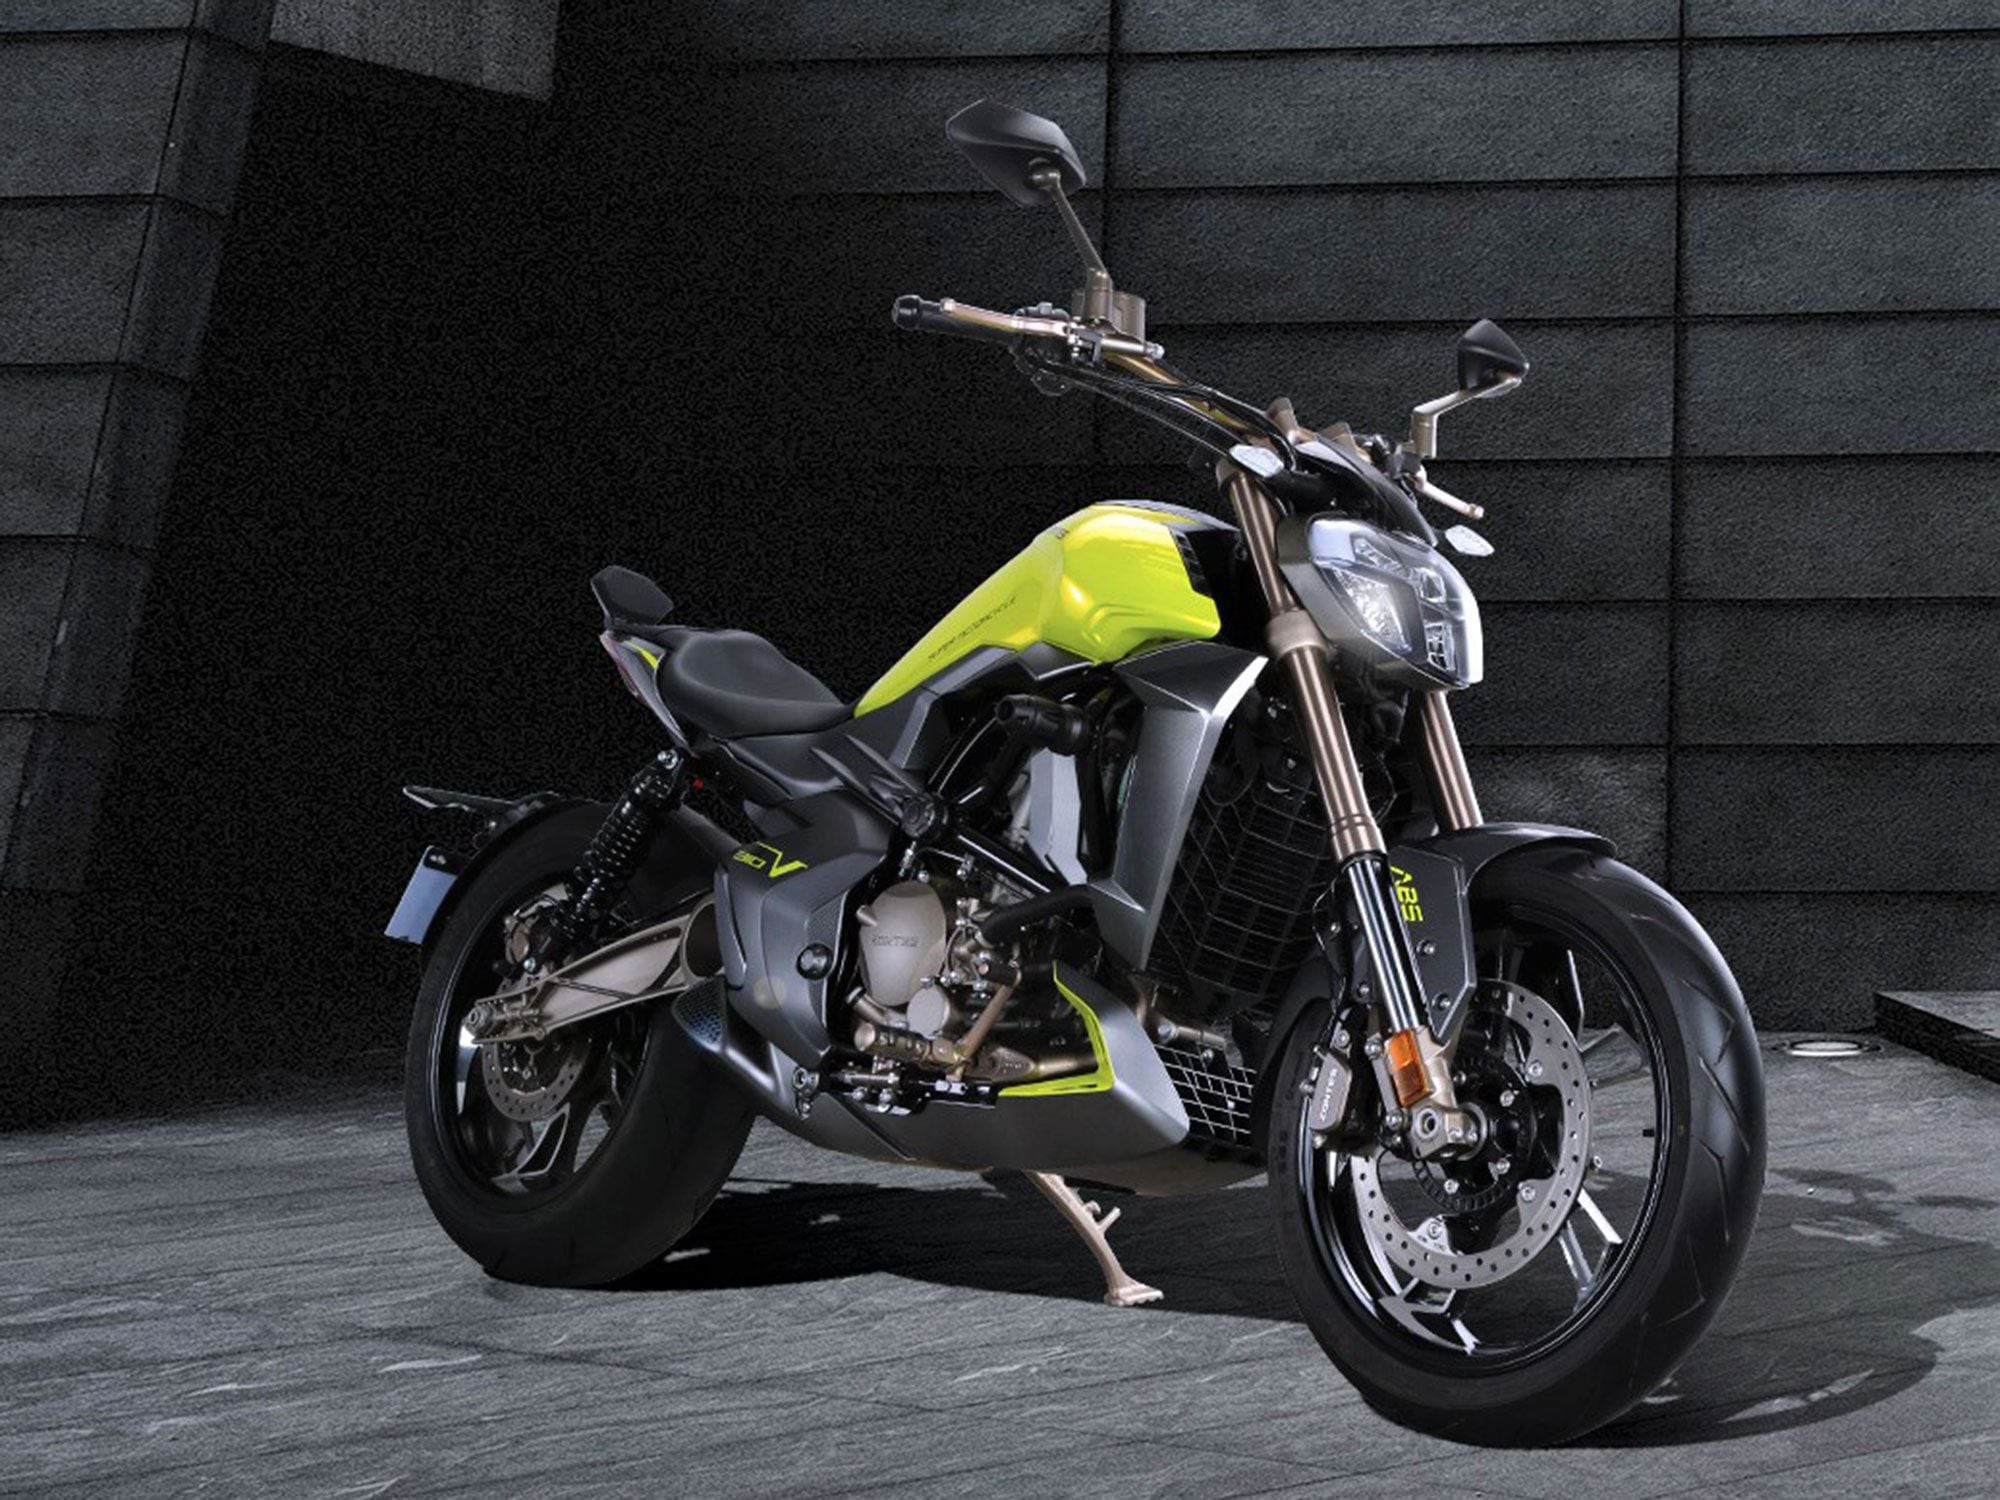 With the new engine, Zontes hopes to offer a range of models as with its current single-cylinder lineup (which includes the Diavel-like 310V, shown).